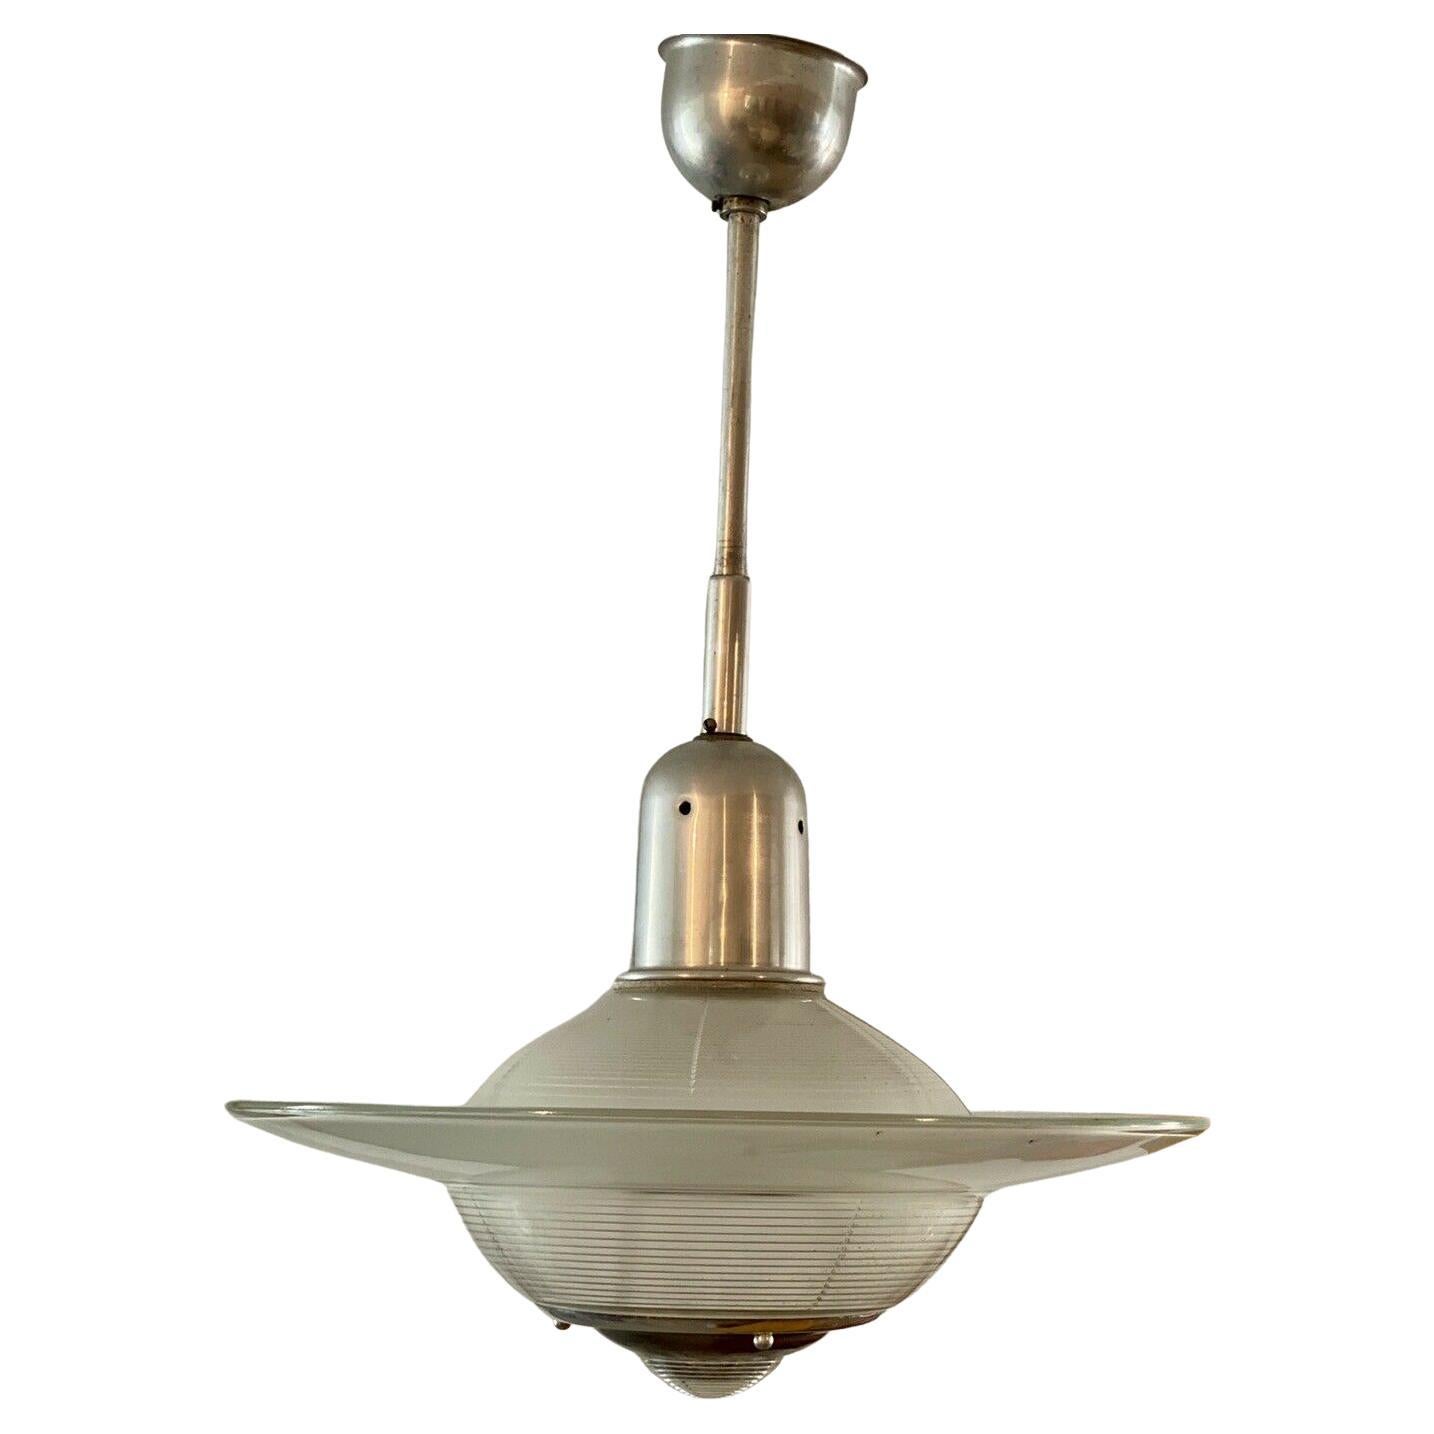 Vintage French Industrial Ceiling Light from Holophane, circa 1940/1950